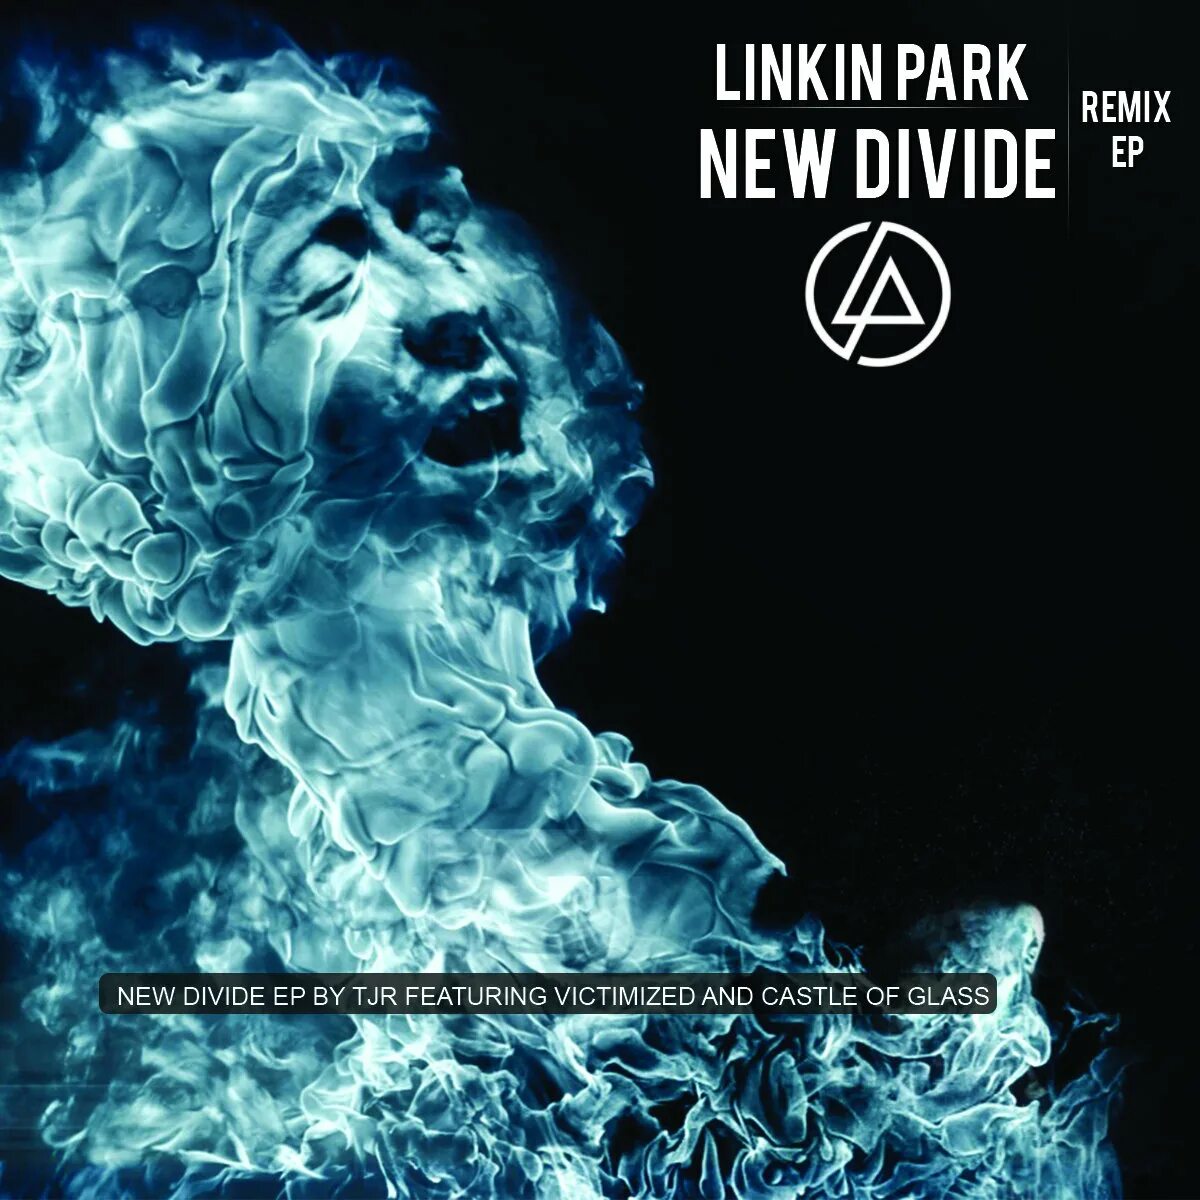 New divide текст. New Divide Linkin. Linkin Park Divide. New Divide Linkin Park трансформеры. Linkin Park New Divide album.